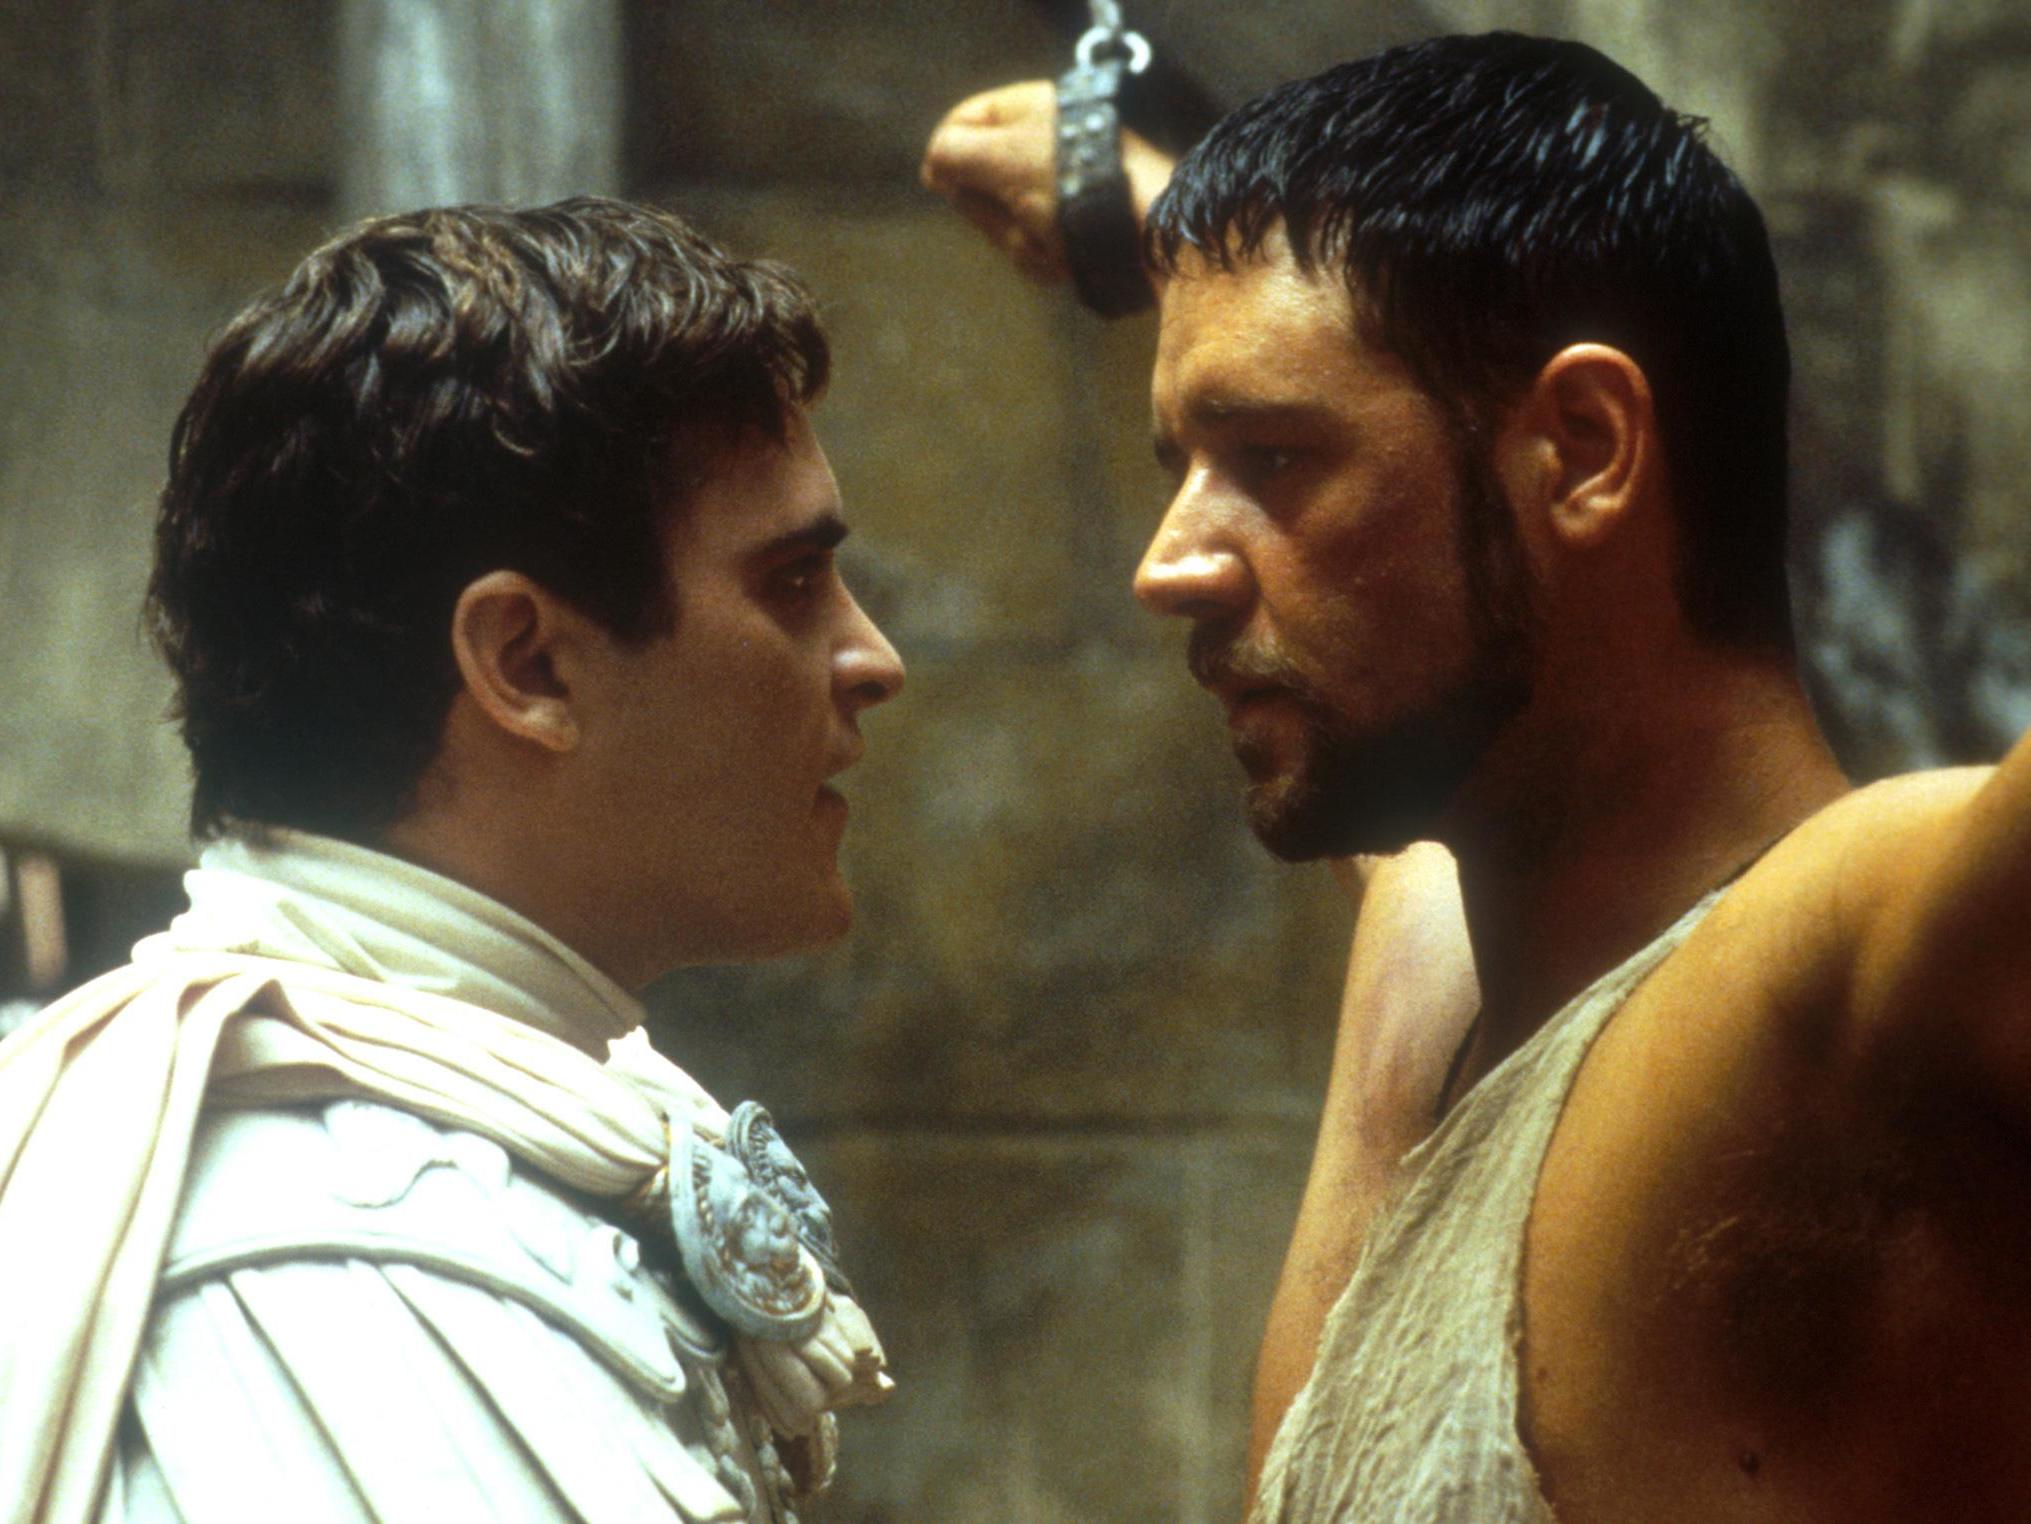 Joaquin Phoenix was compelling as the villainous Commodus, with the script being adjusted to fit his performance